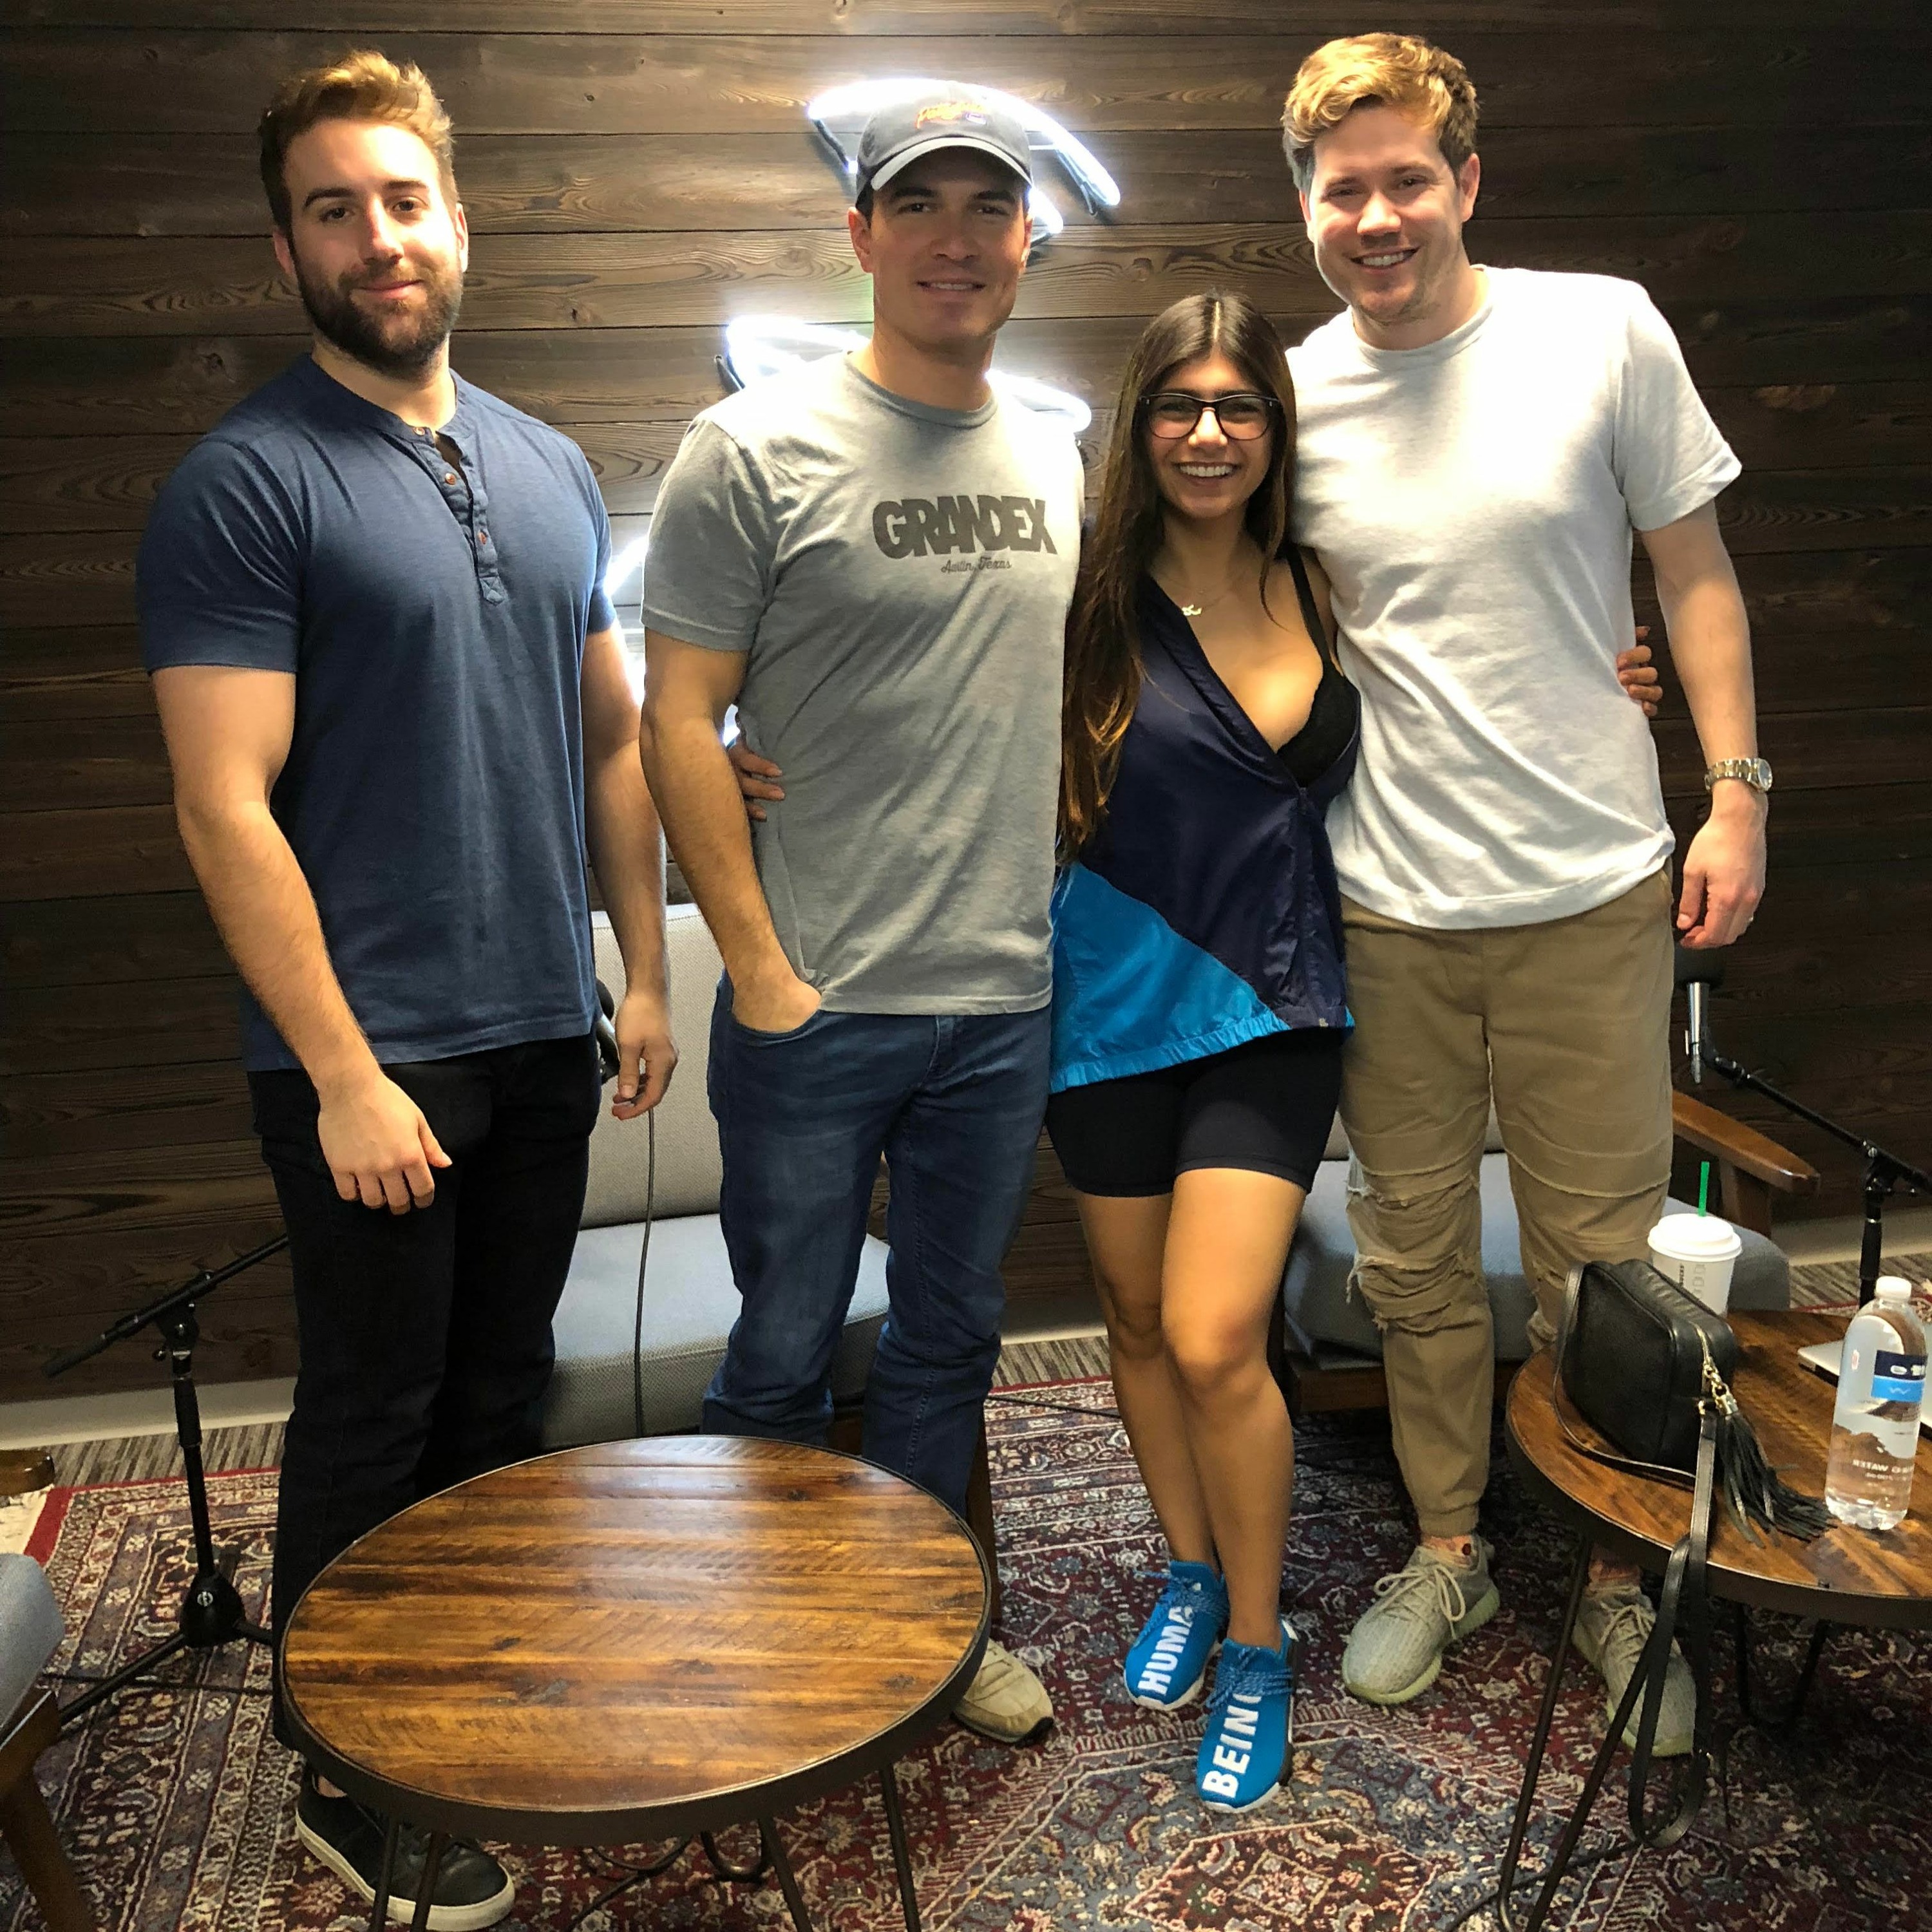 Mia Khalifa's Triumphant Return by Back Door Cover | Podchaser